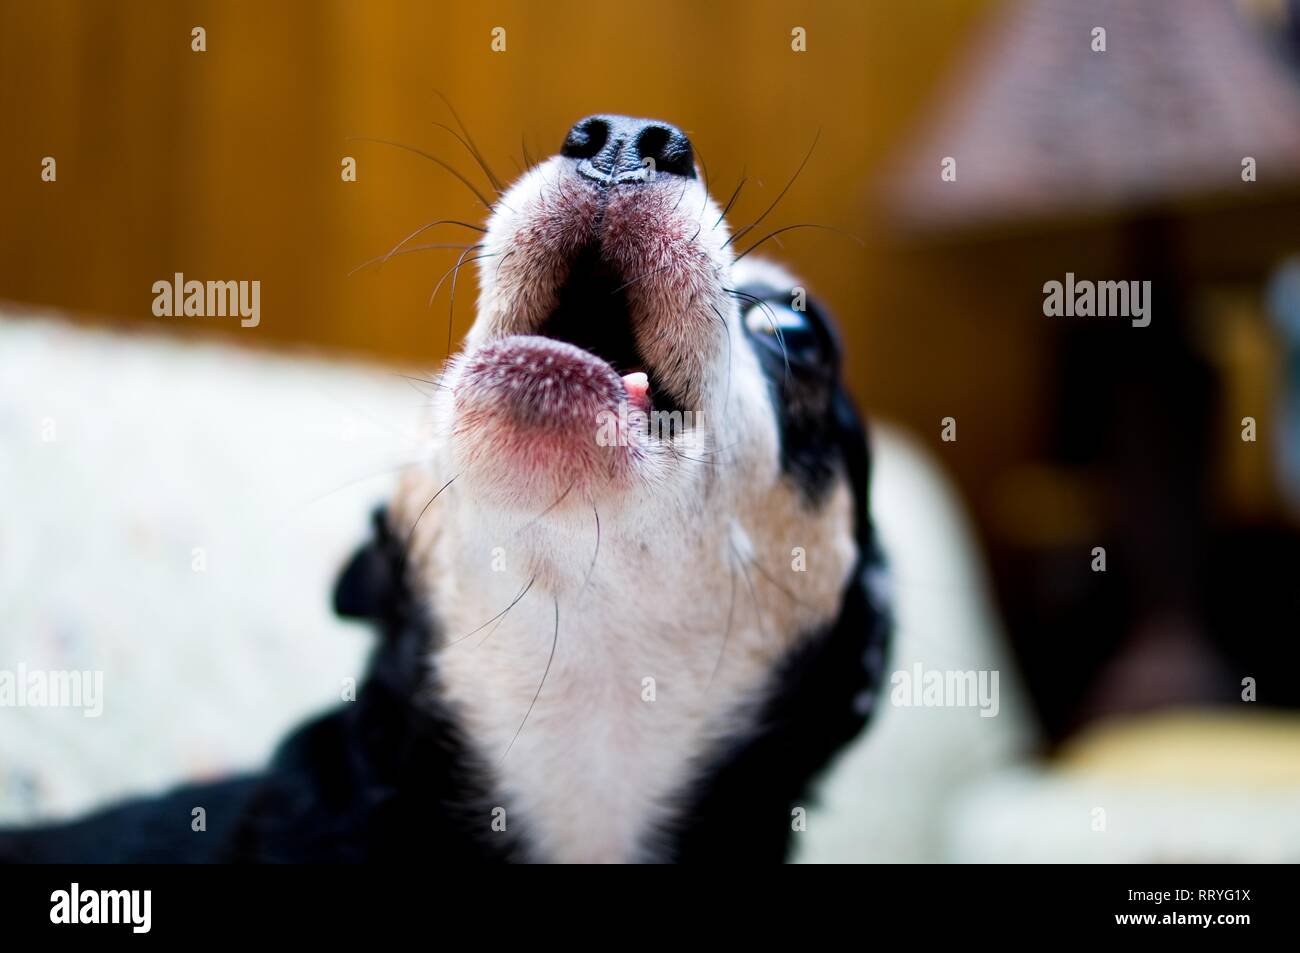 Dog's nose and mouth Stock Photo